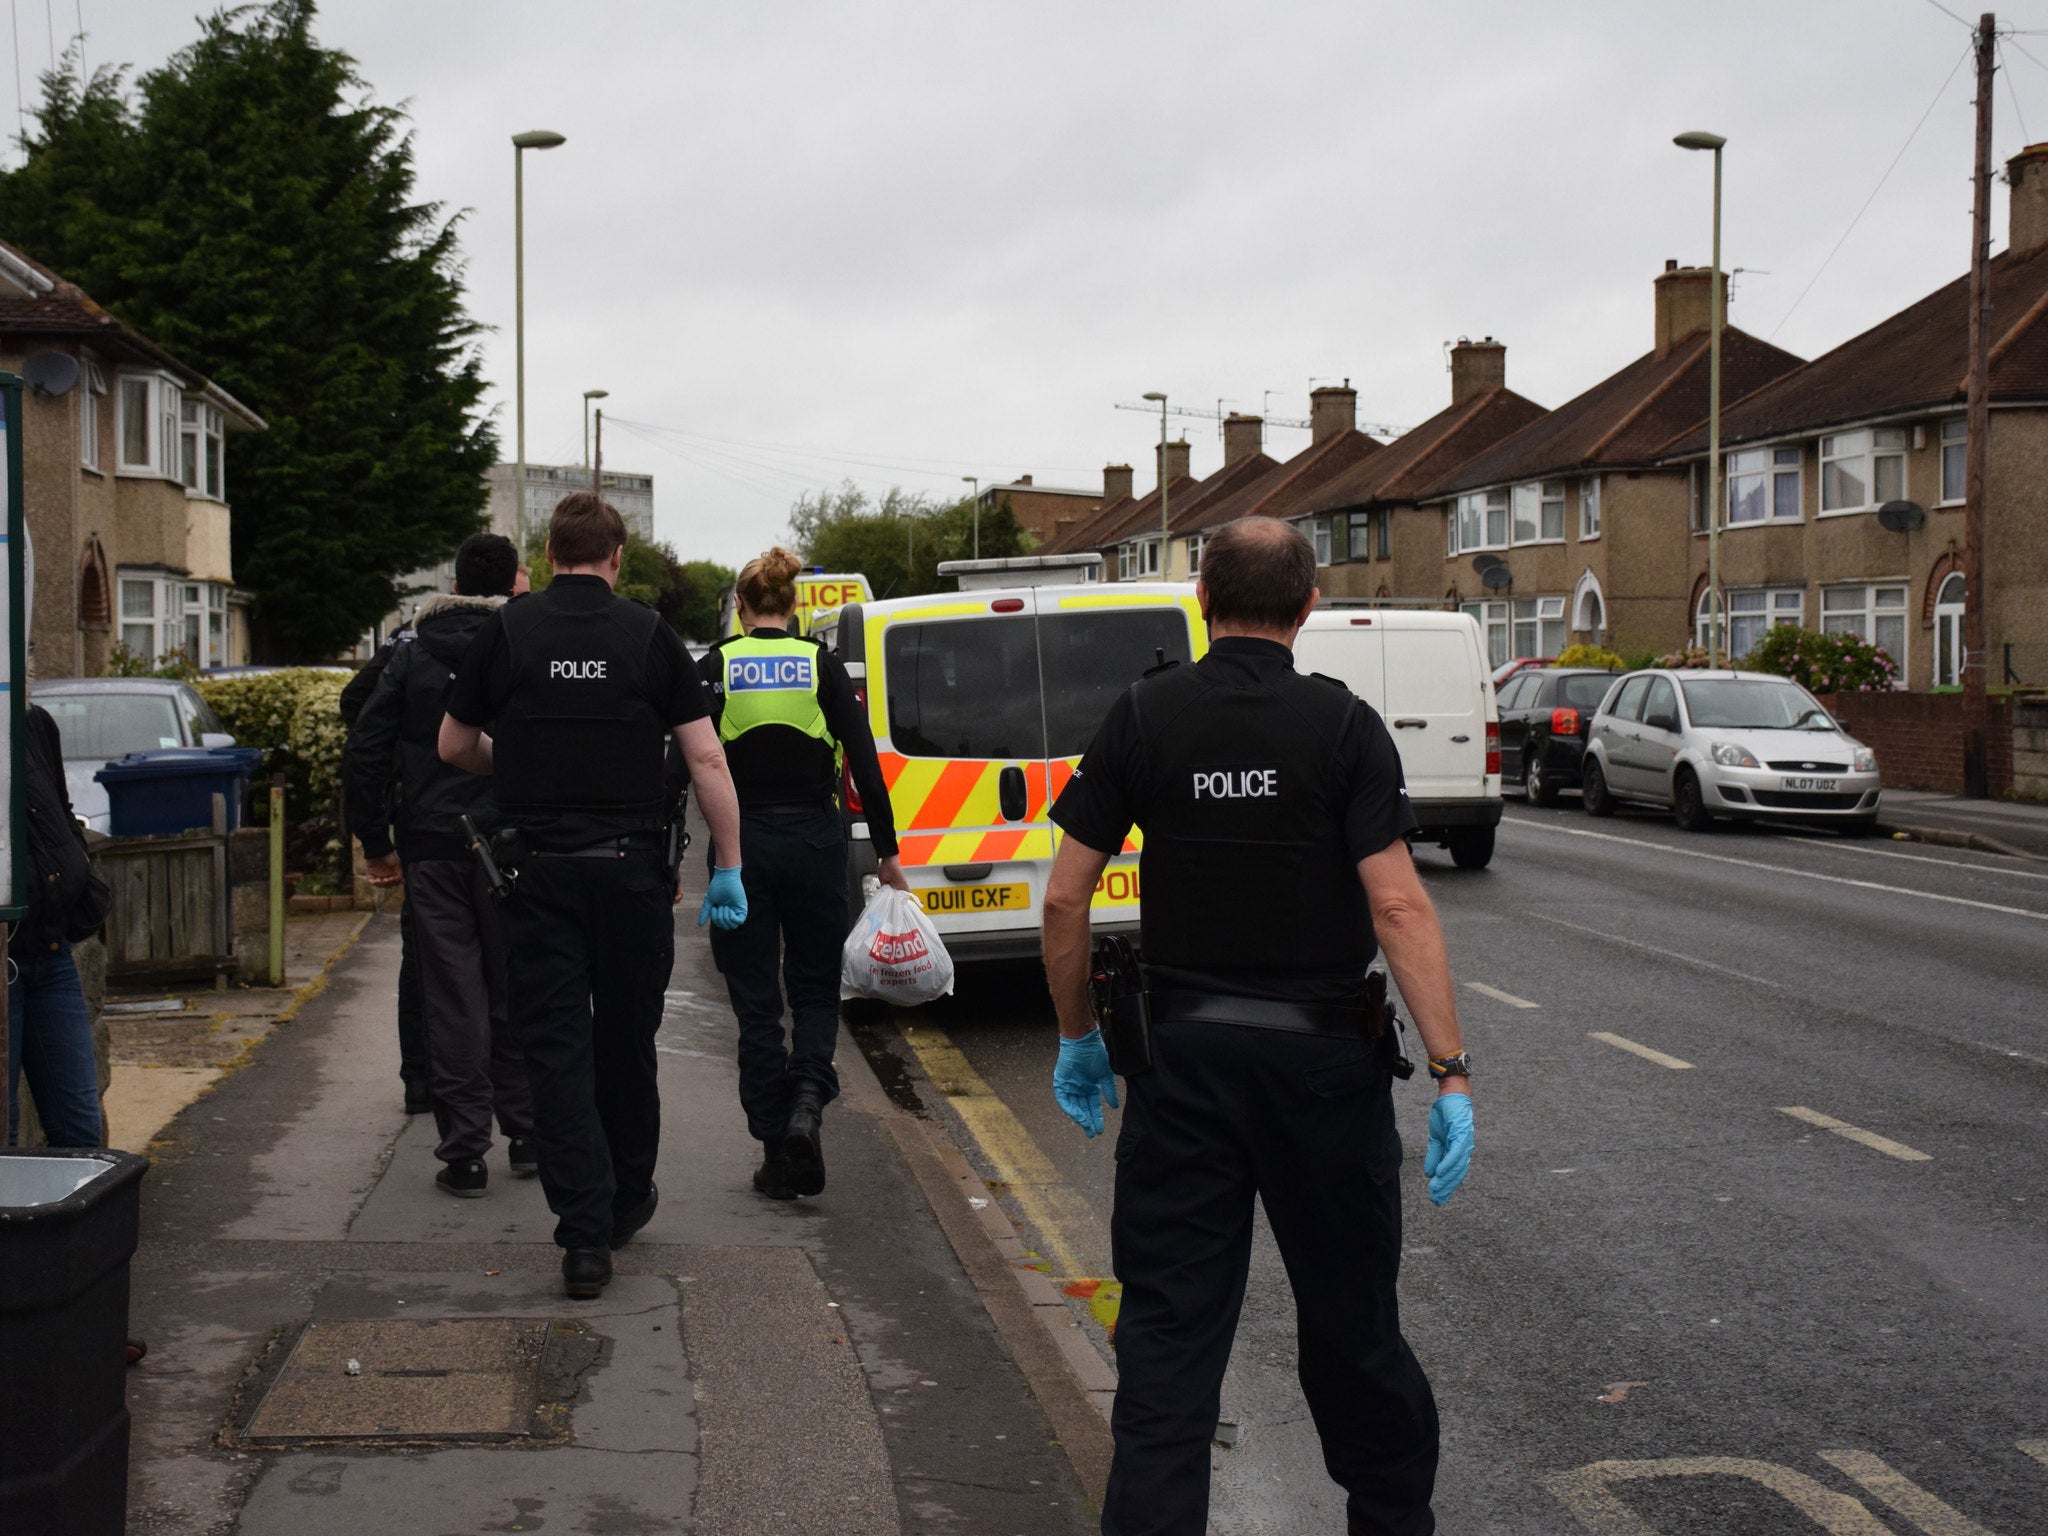 Thames Valley Police officers conducted raids on child sexual exploitation suspects in Oxford on 2 June